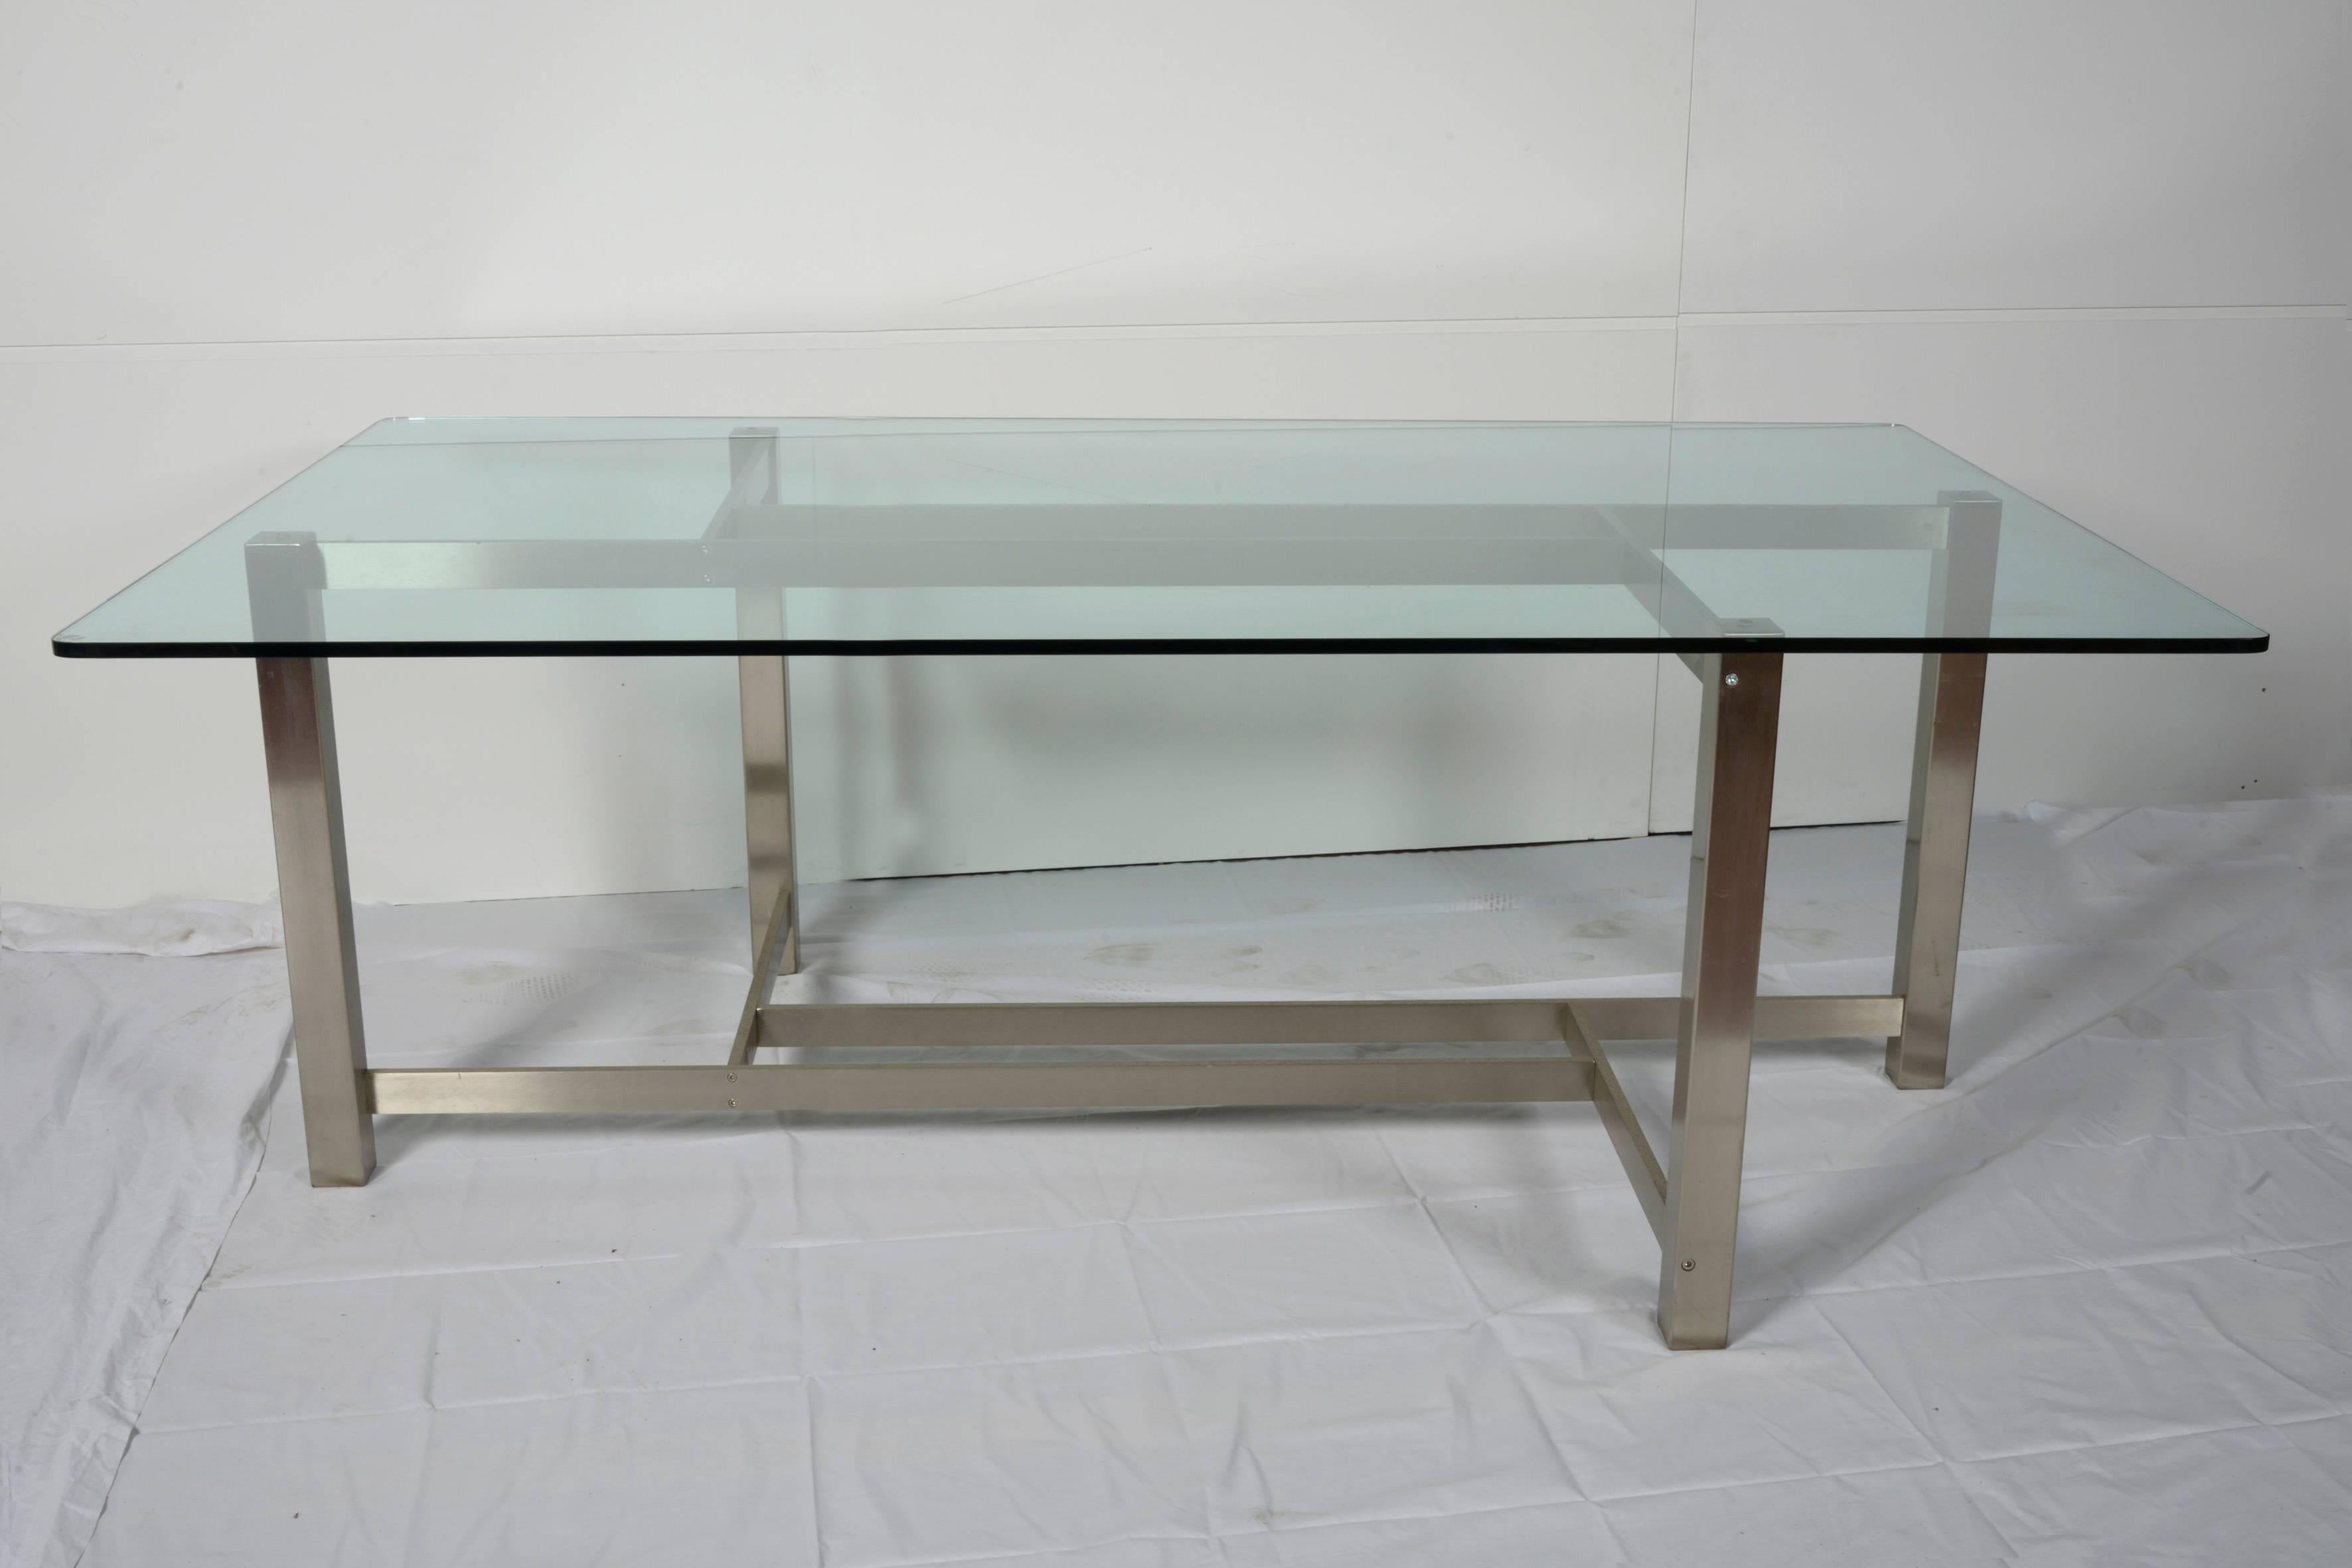 Forma Nova double-sided desk or center table.
Signed.
 